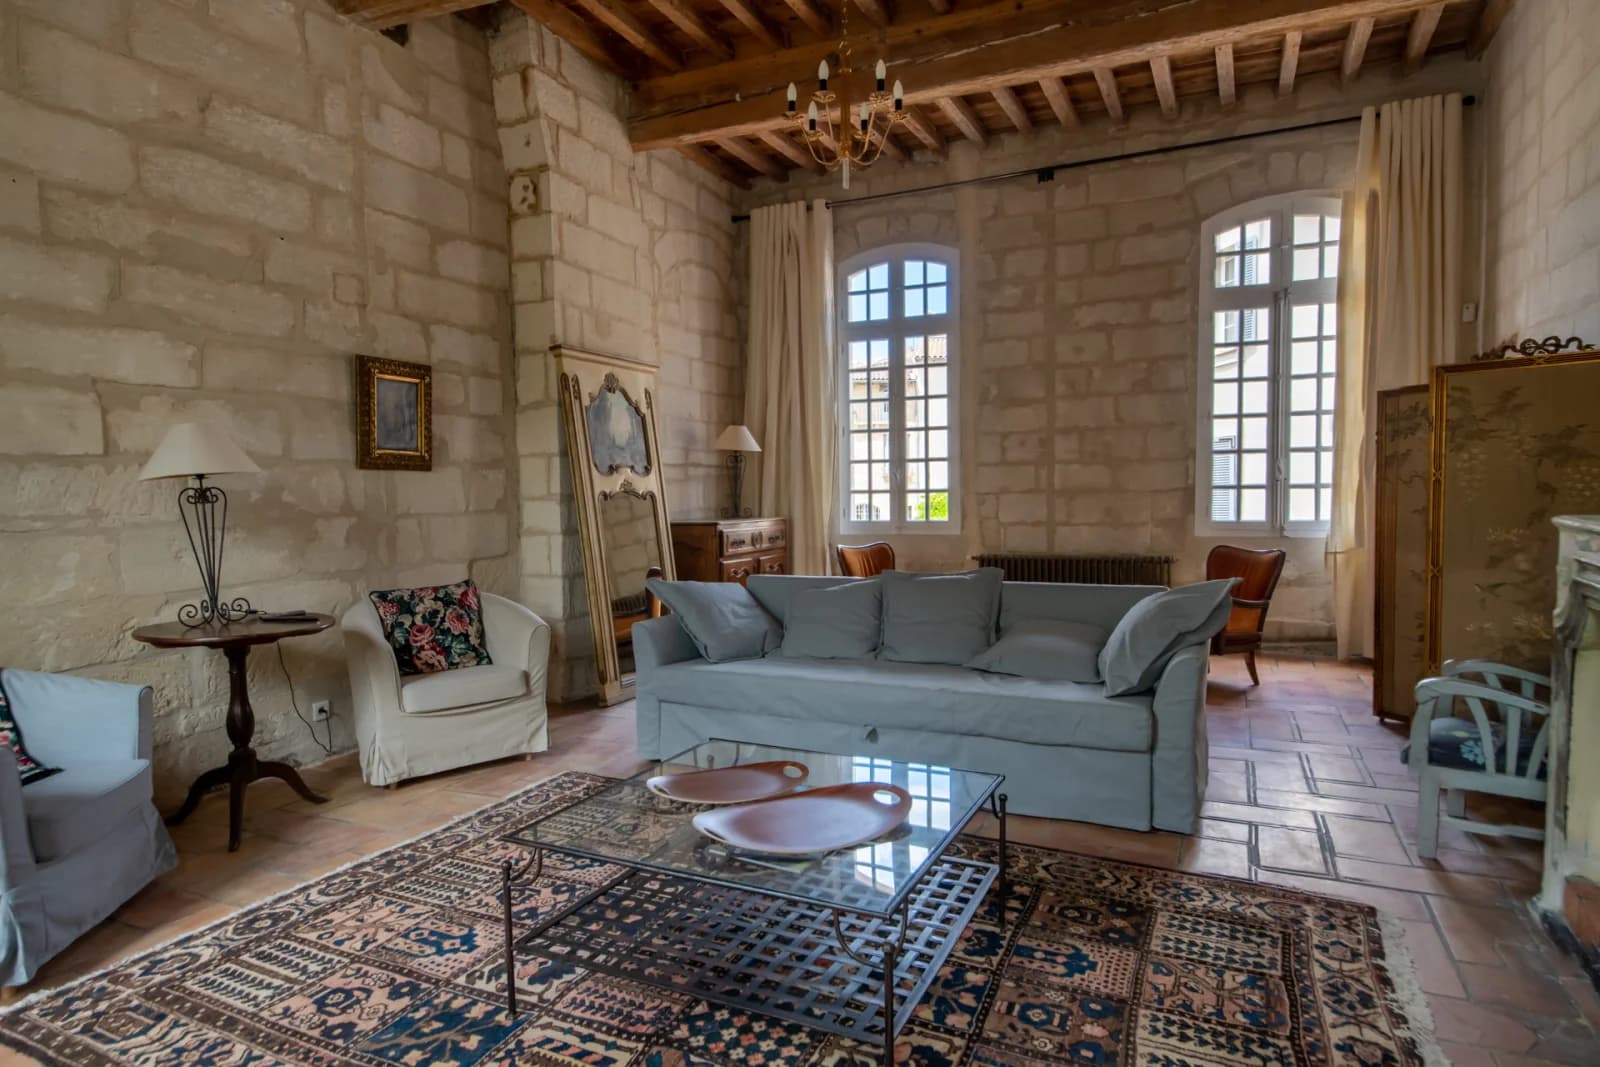 Bedroom in 16th-century town house 5 minutes from Avignon - 1